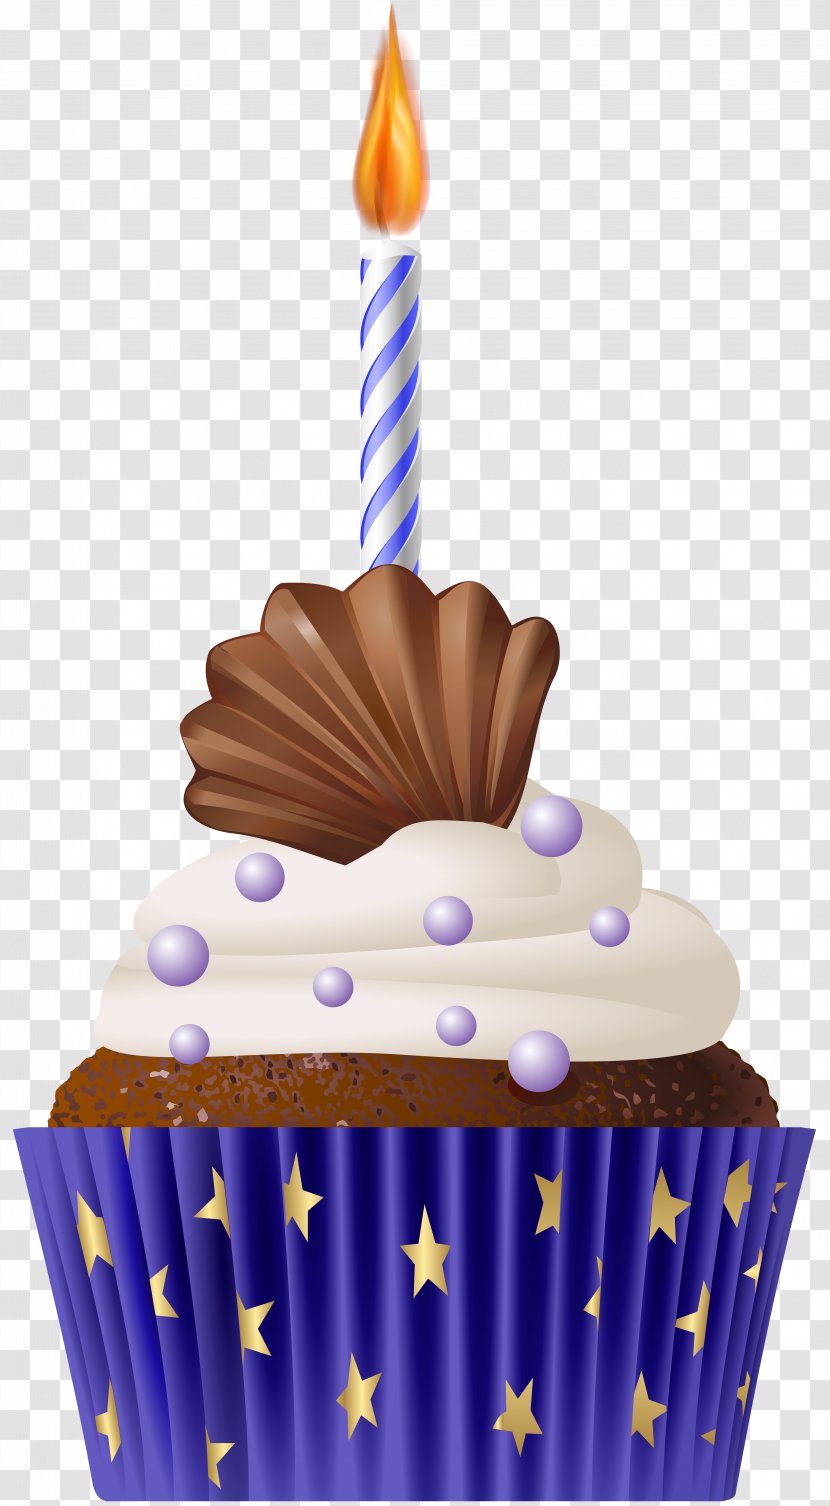 Muffin Cupcake Food Icon - Cake Decorating - Birthday Blue With Candle Clip Art Transparent PNG